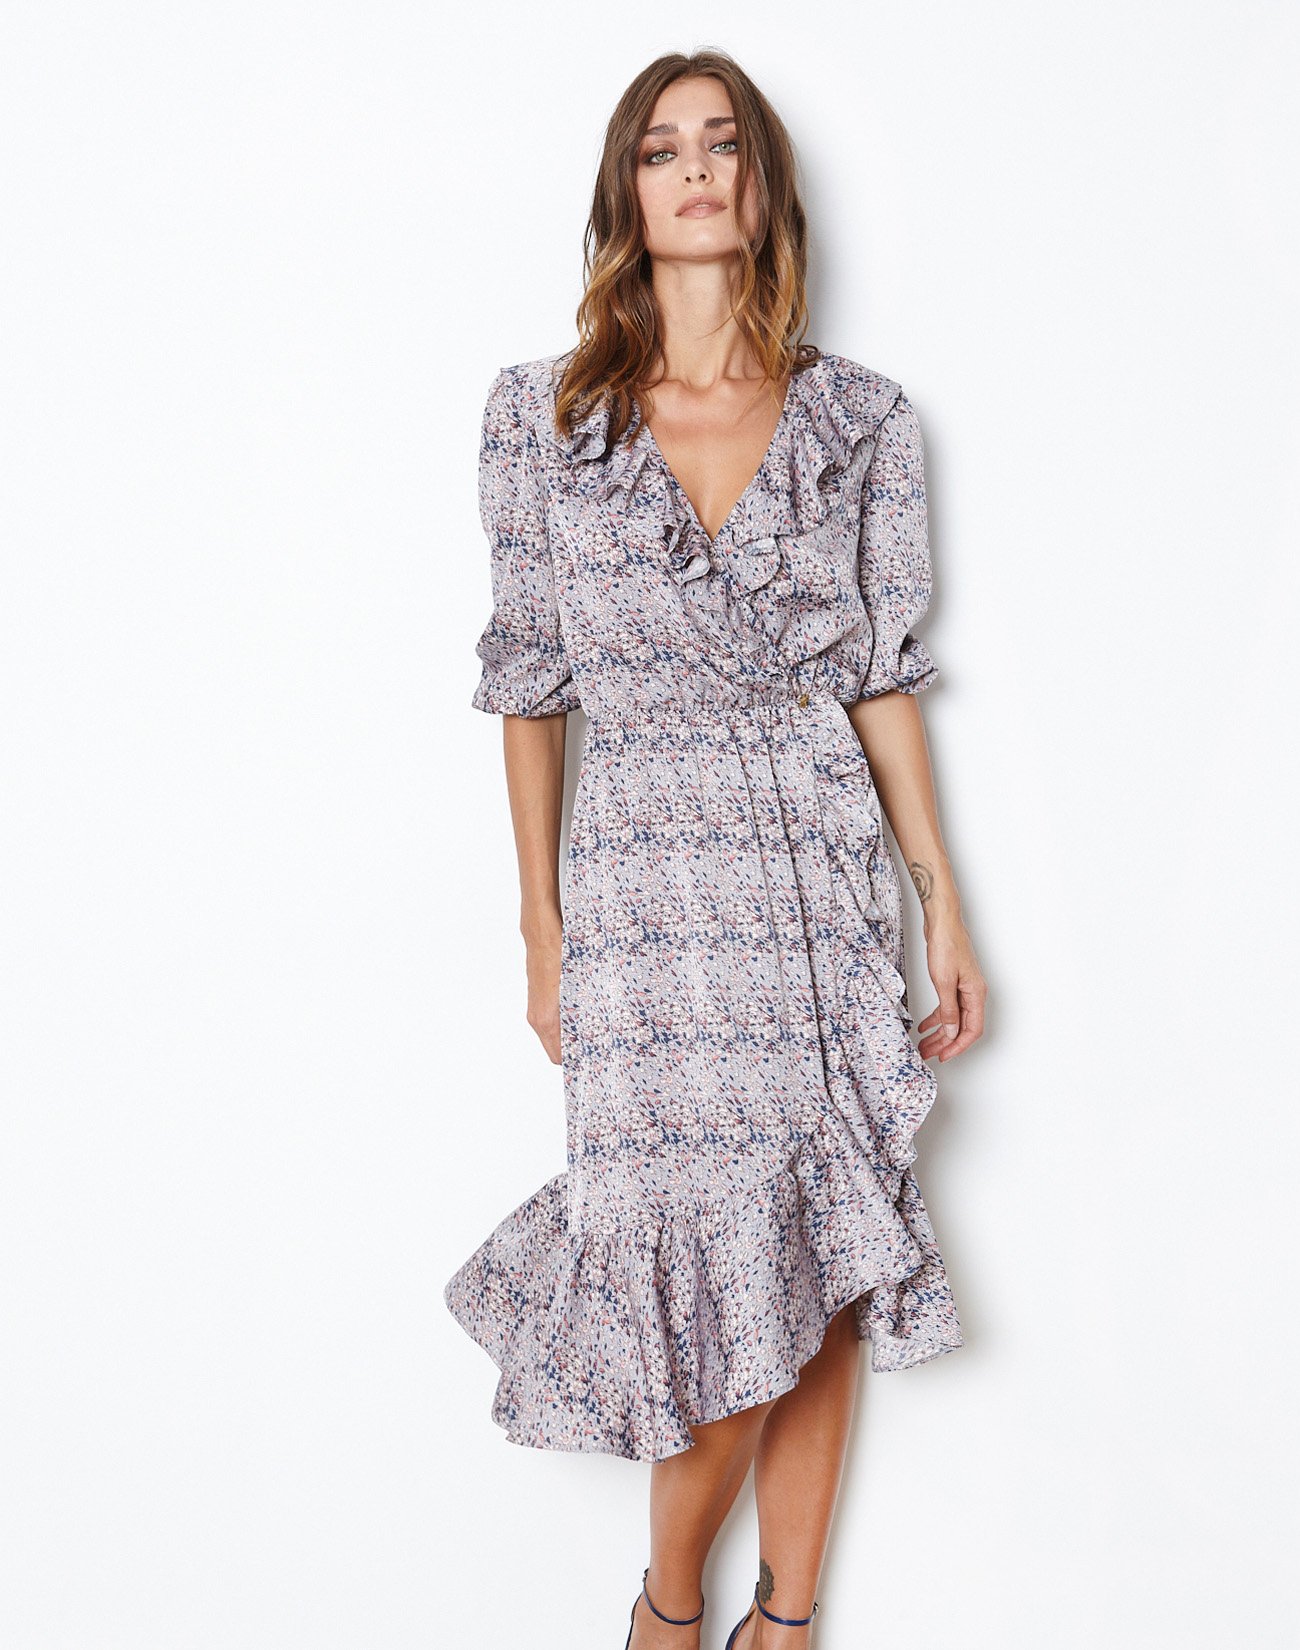 Printed dress with ruffles